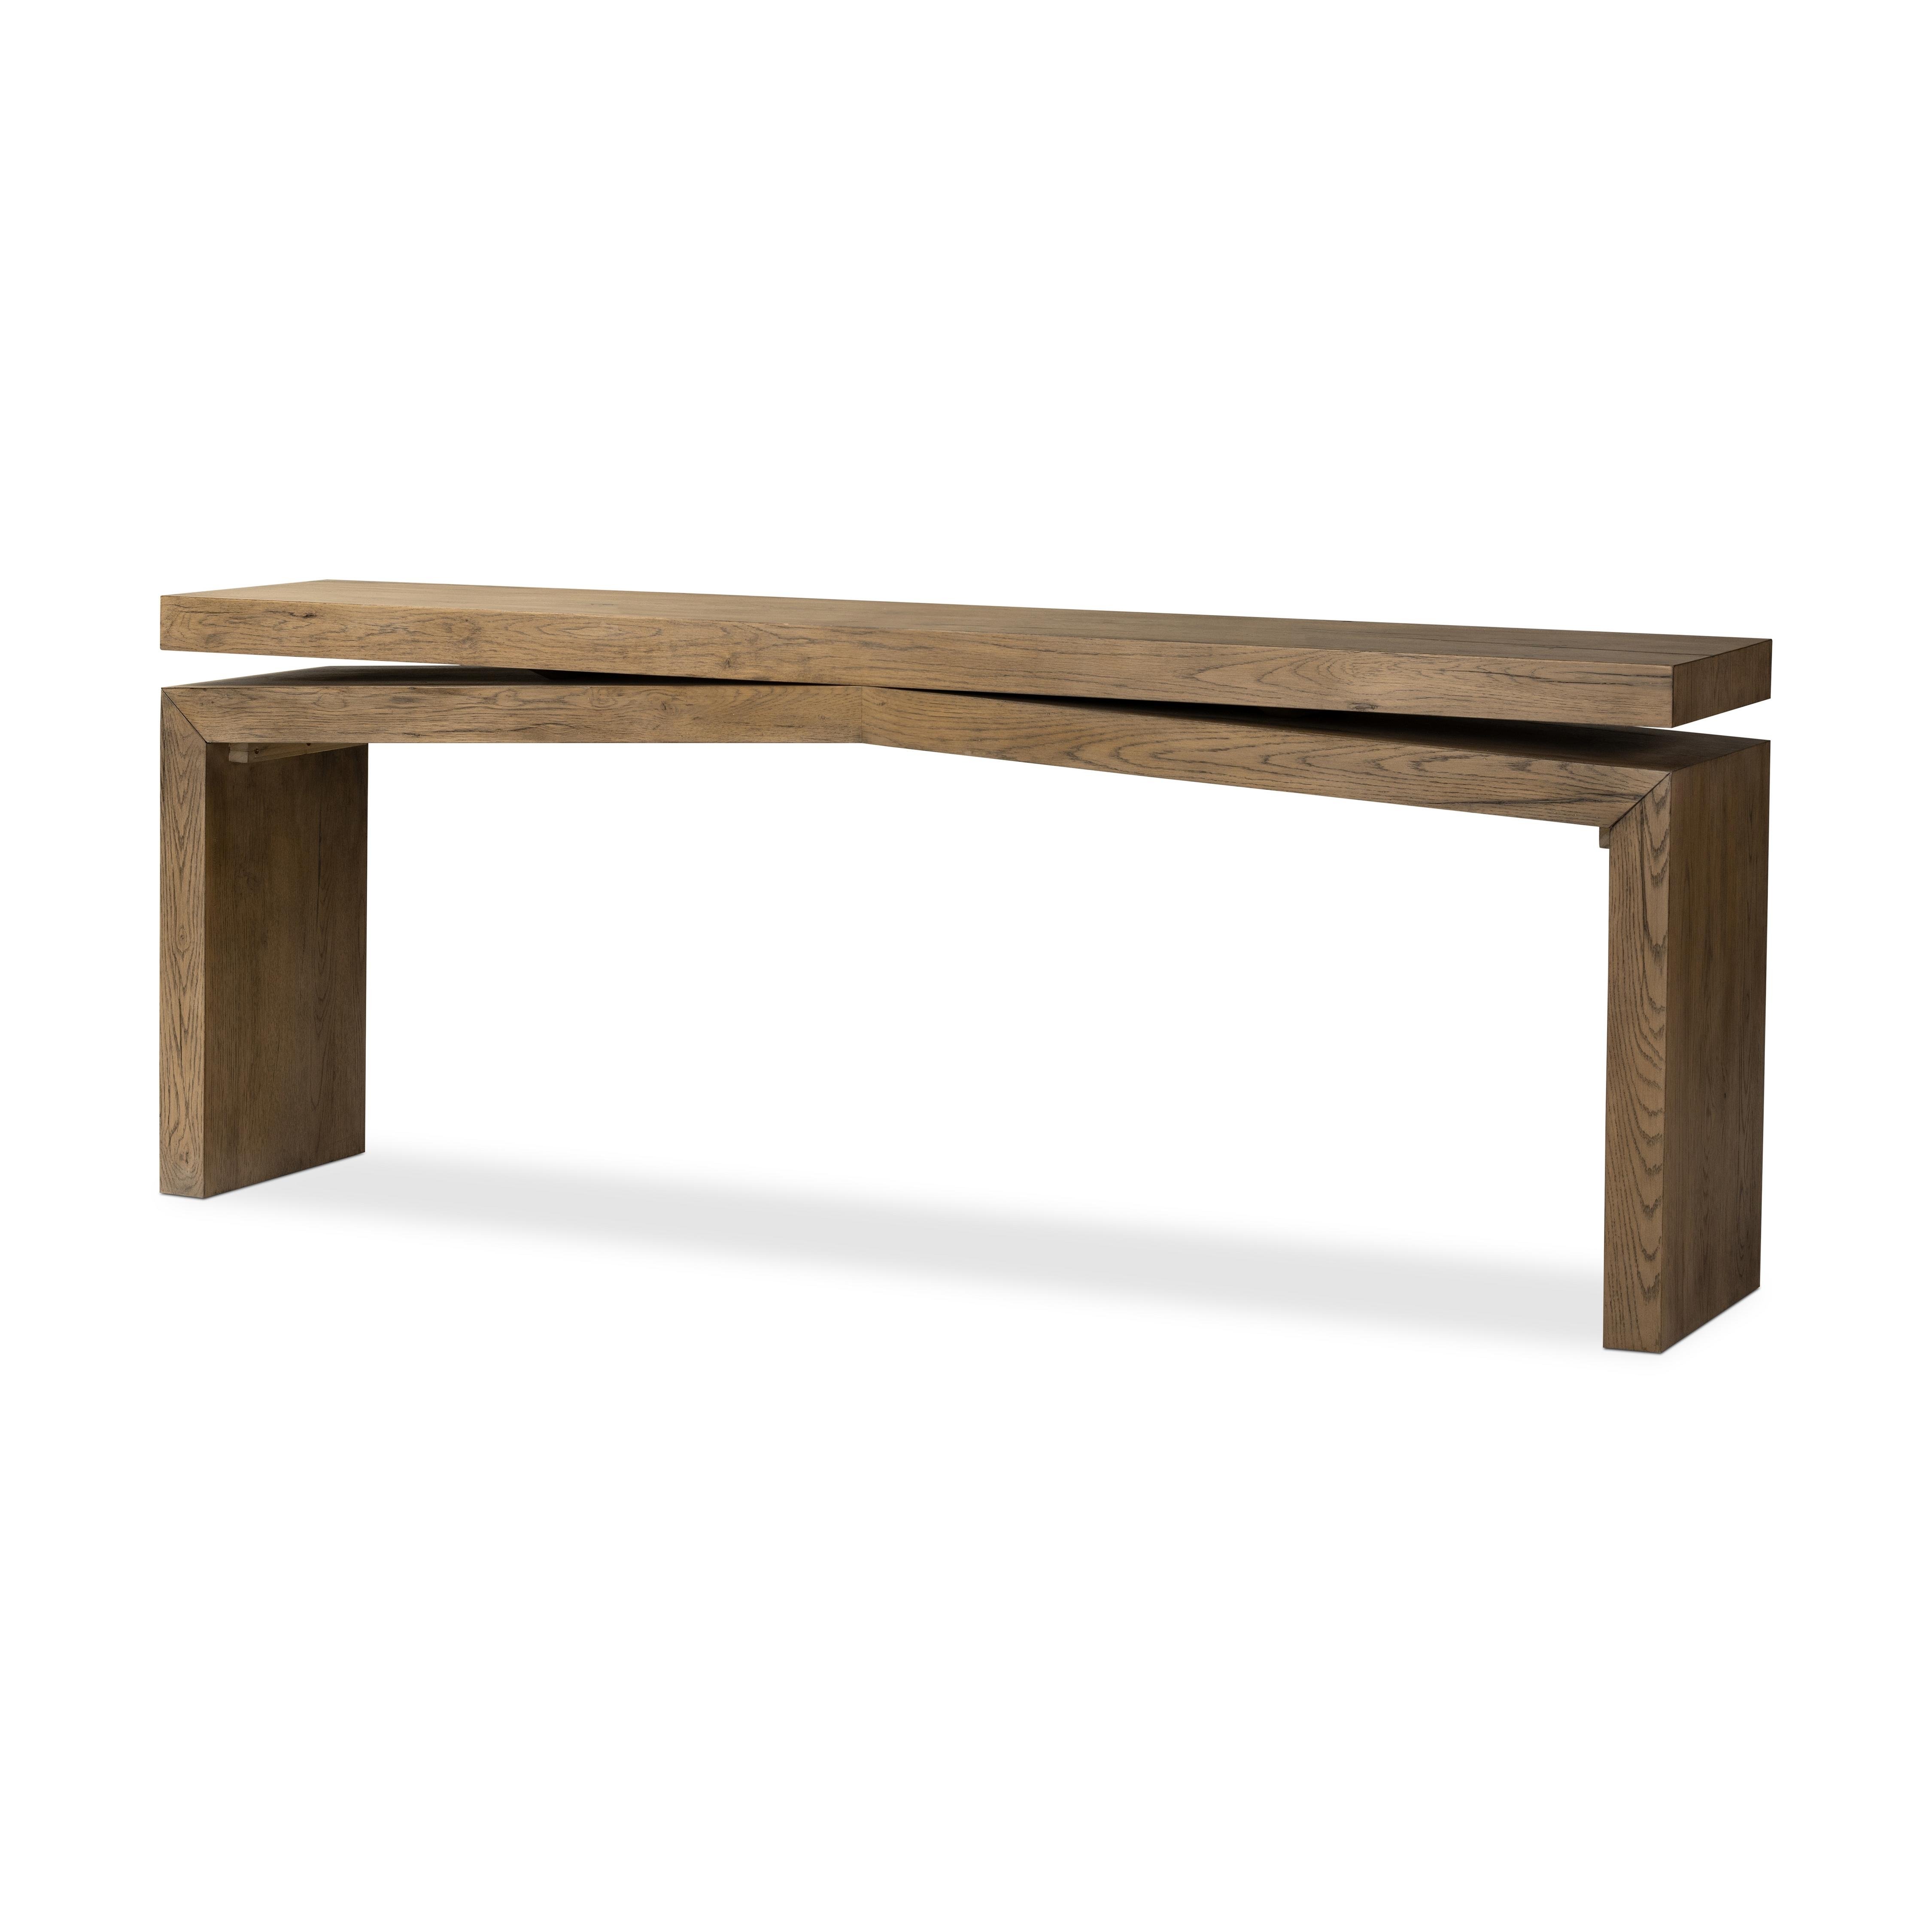 Matthes Console Table-Rustic Natural - Image 0